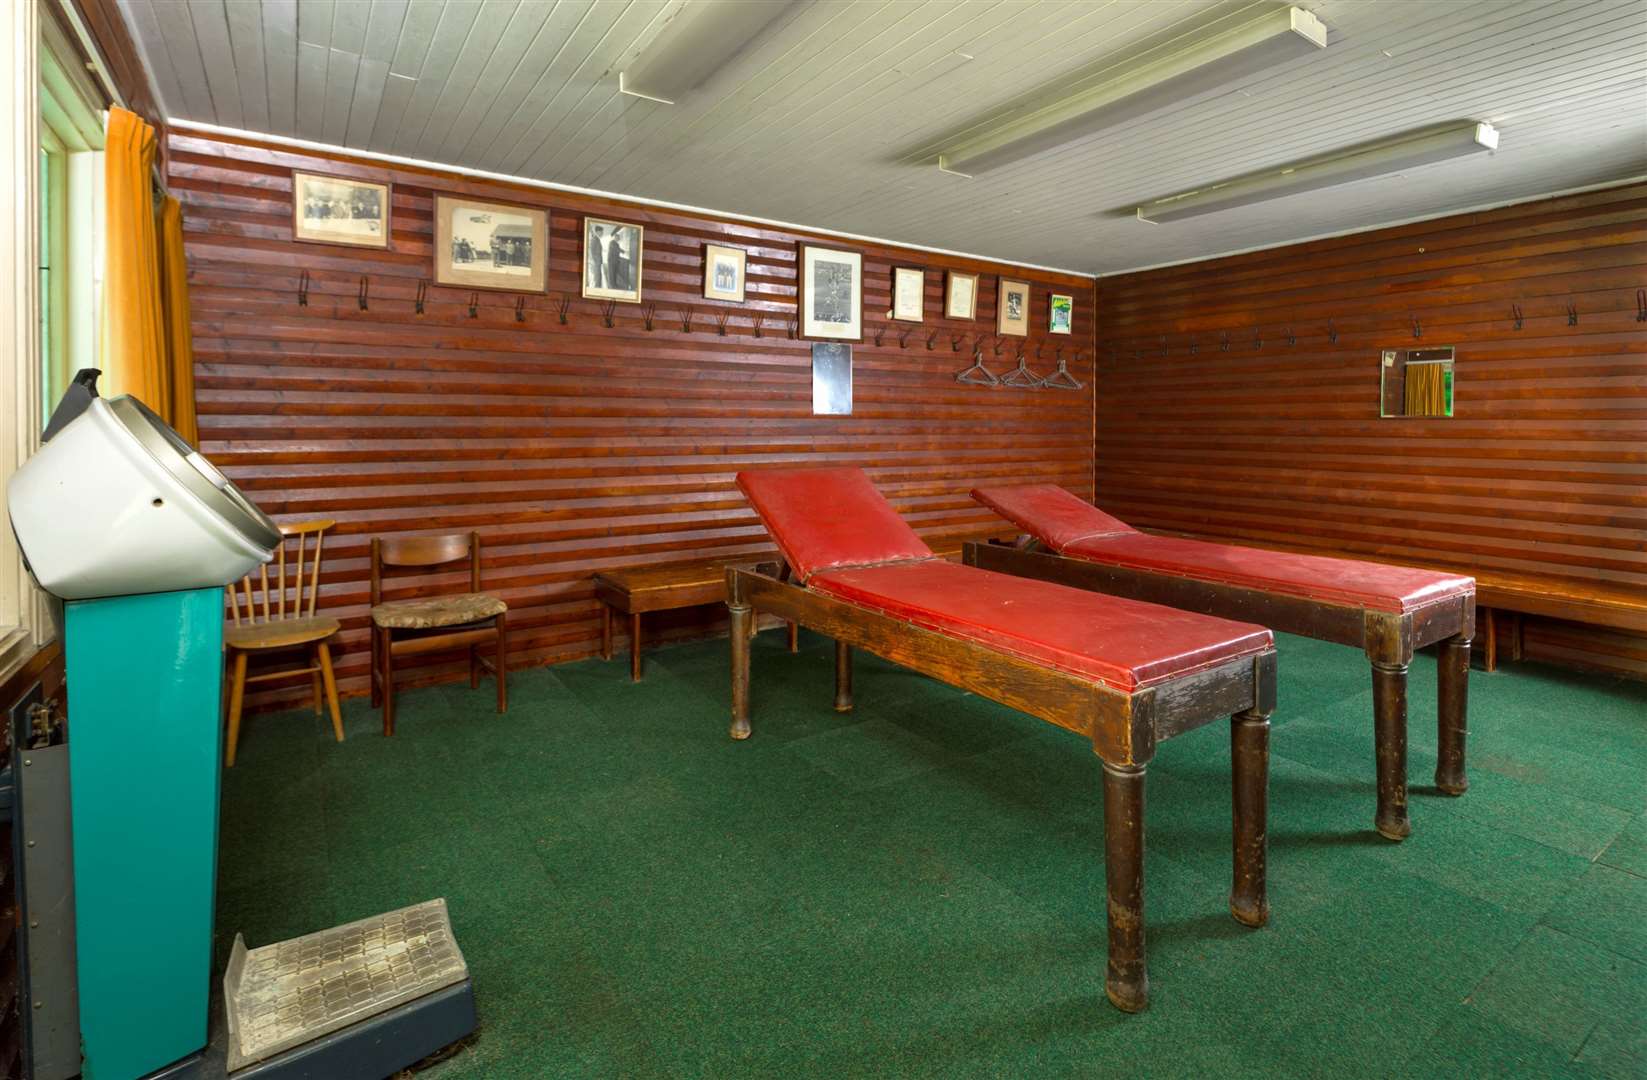 The massage tables inside the sauna - they date from 1948.